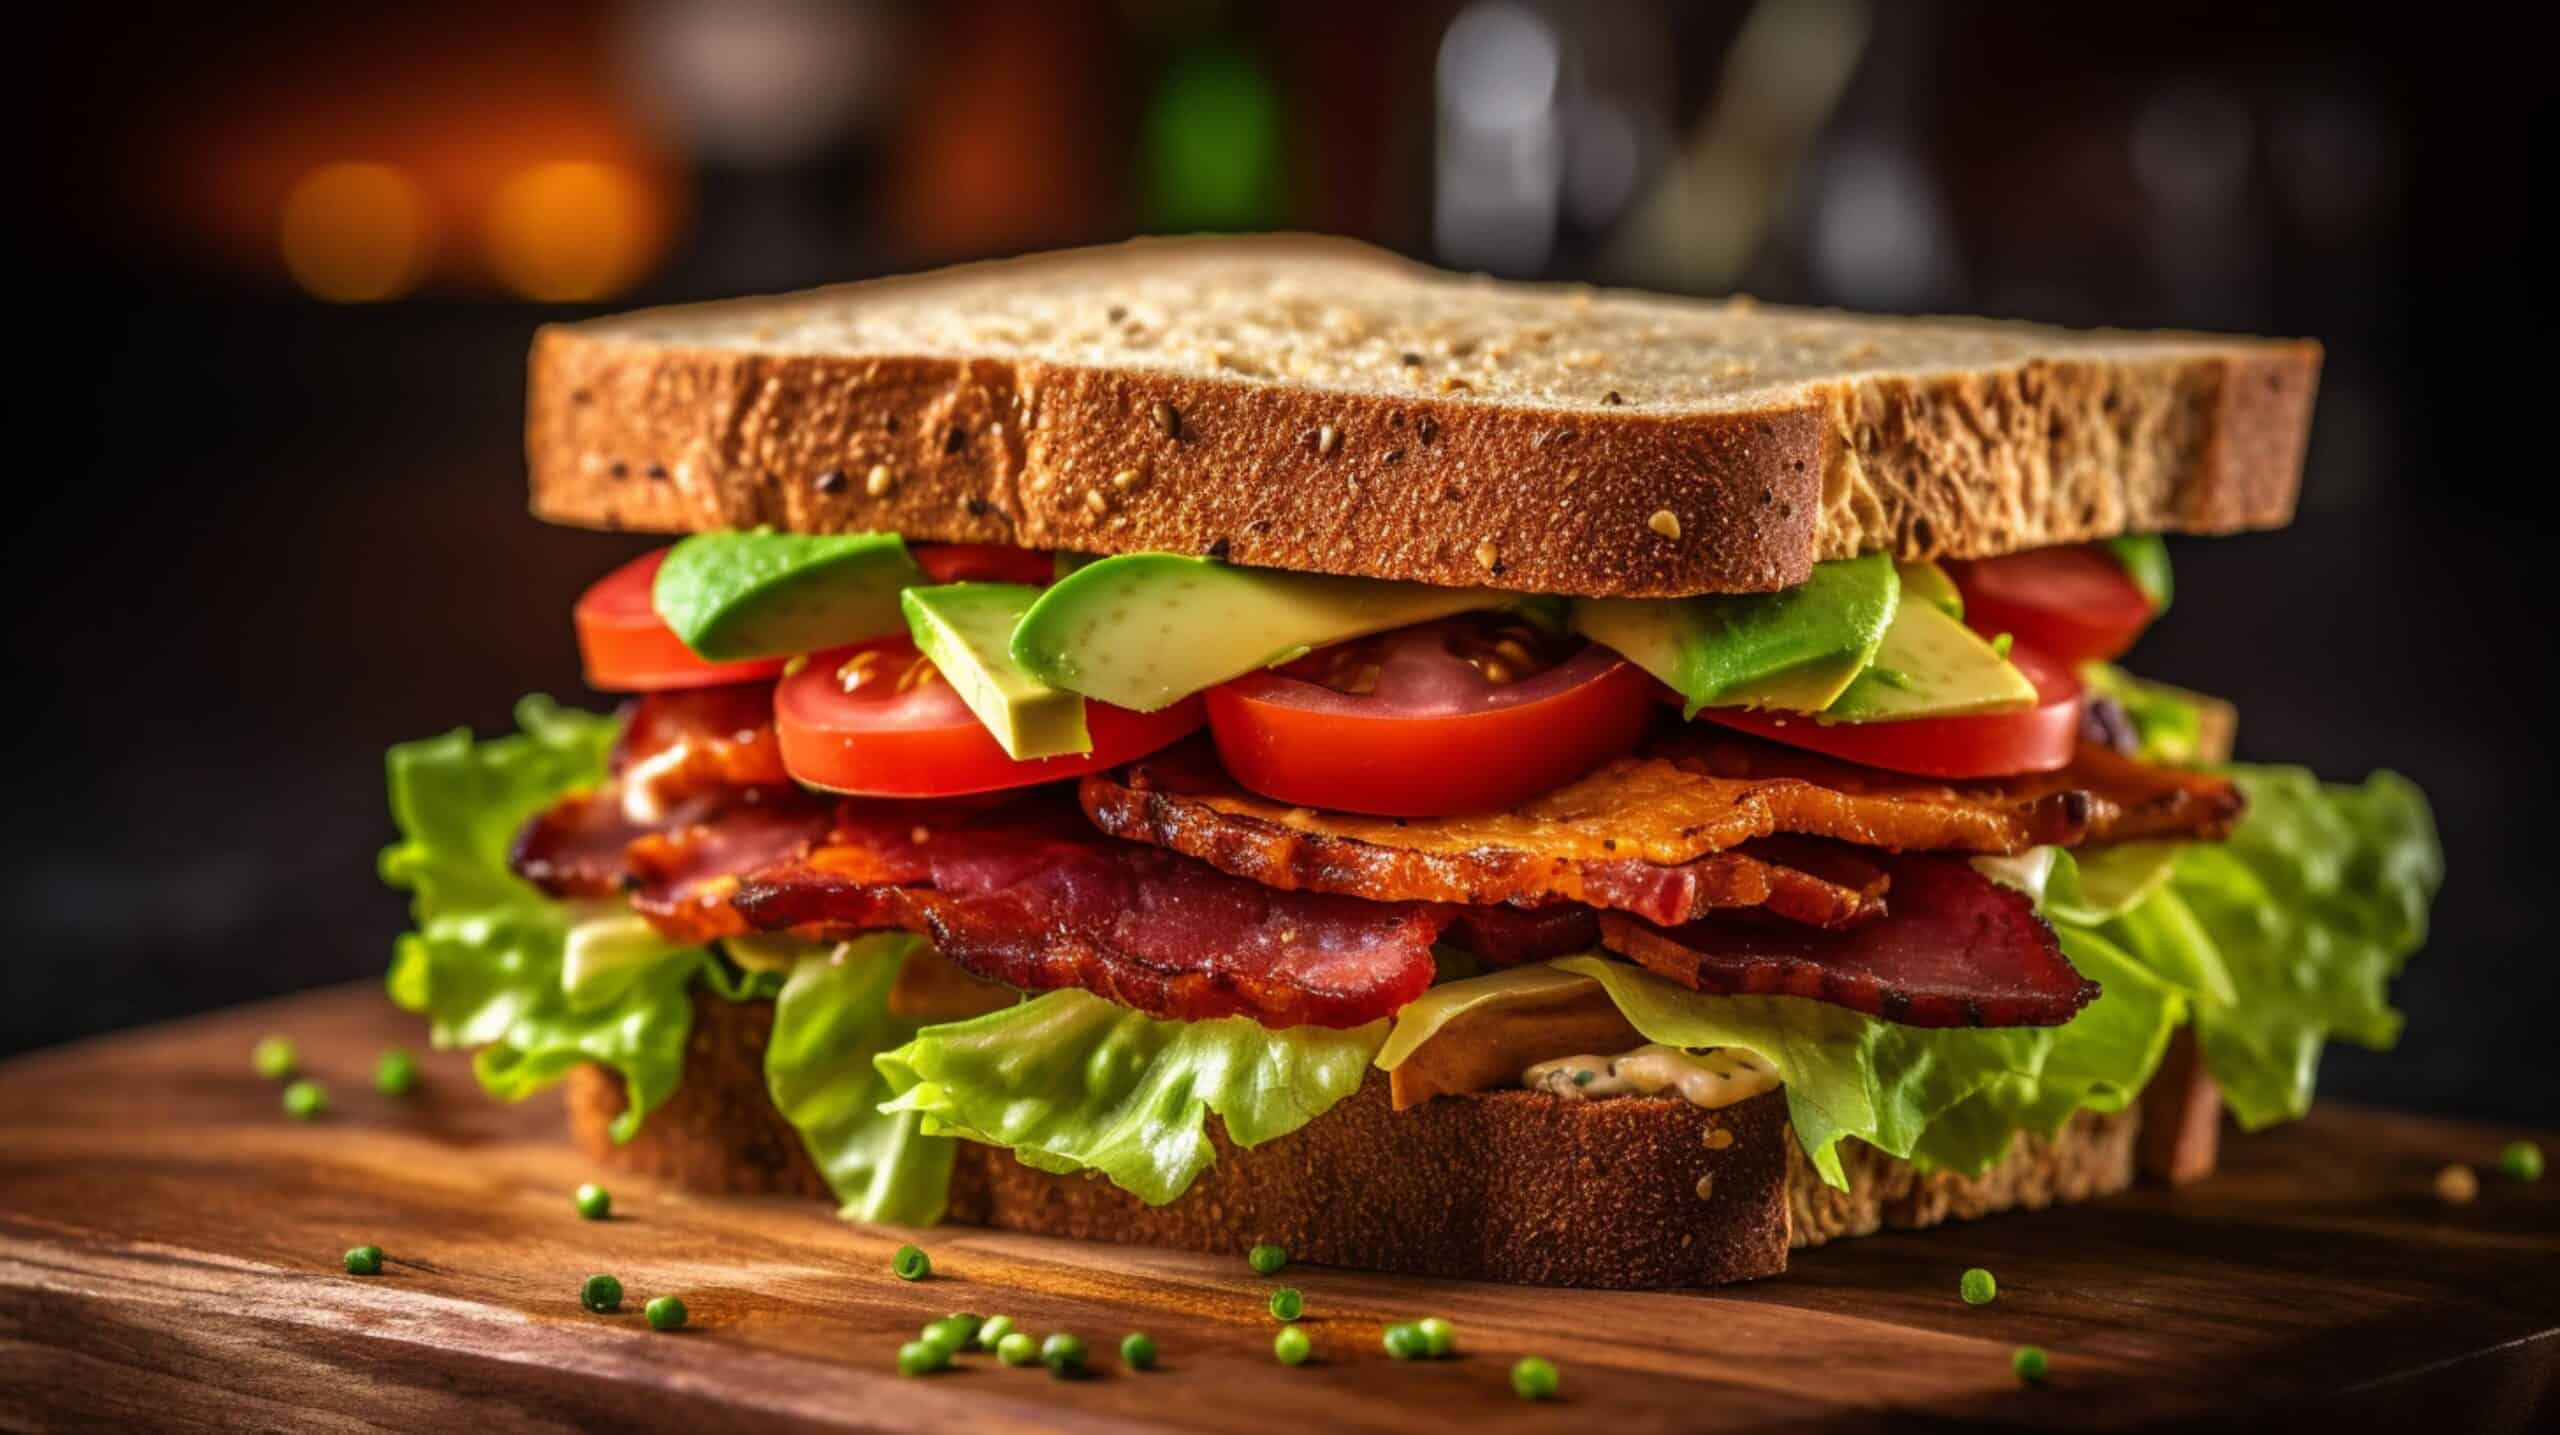 Blt Variations For Weight Loss